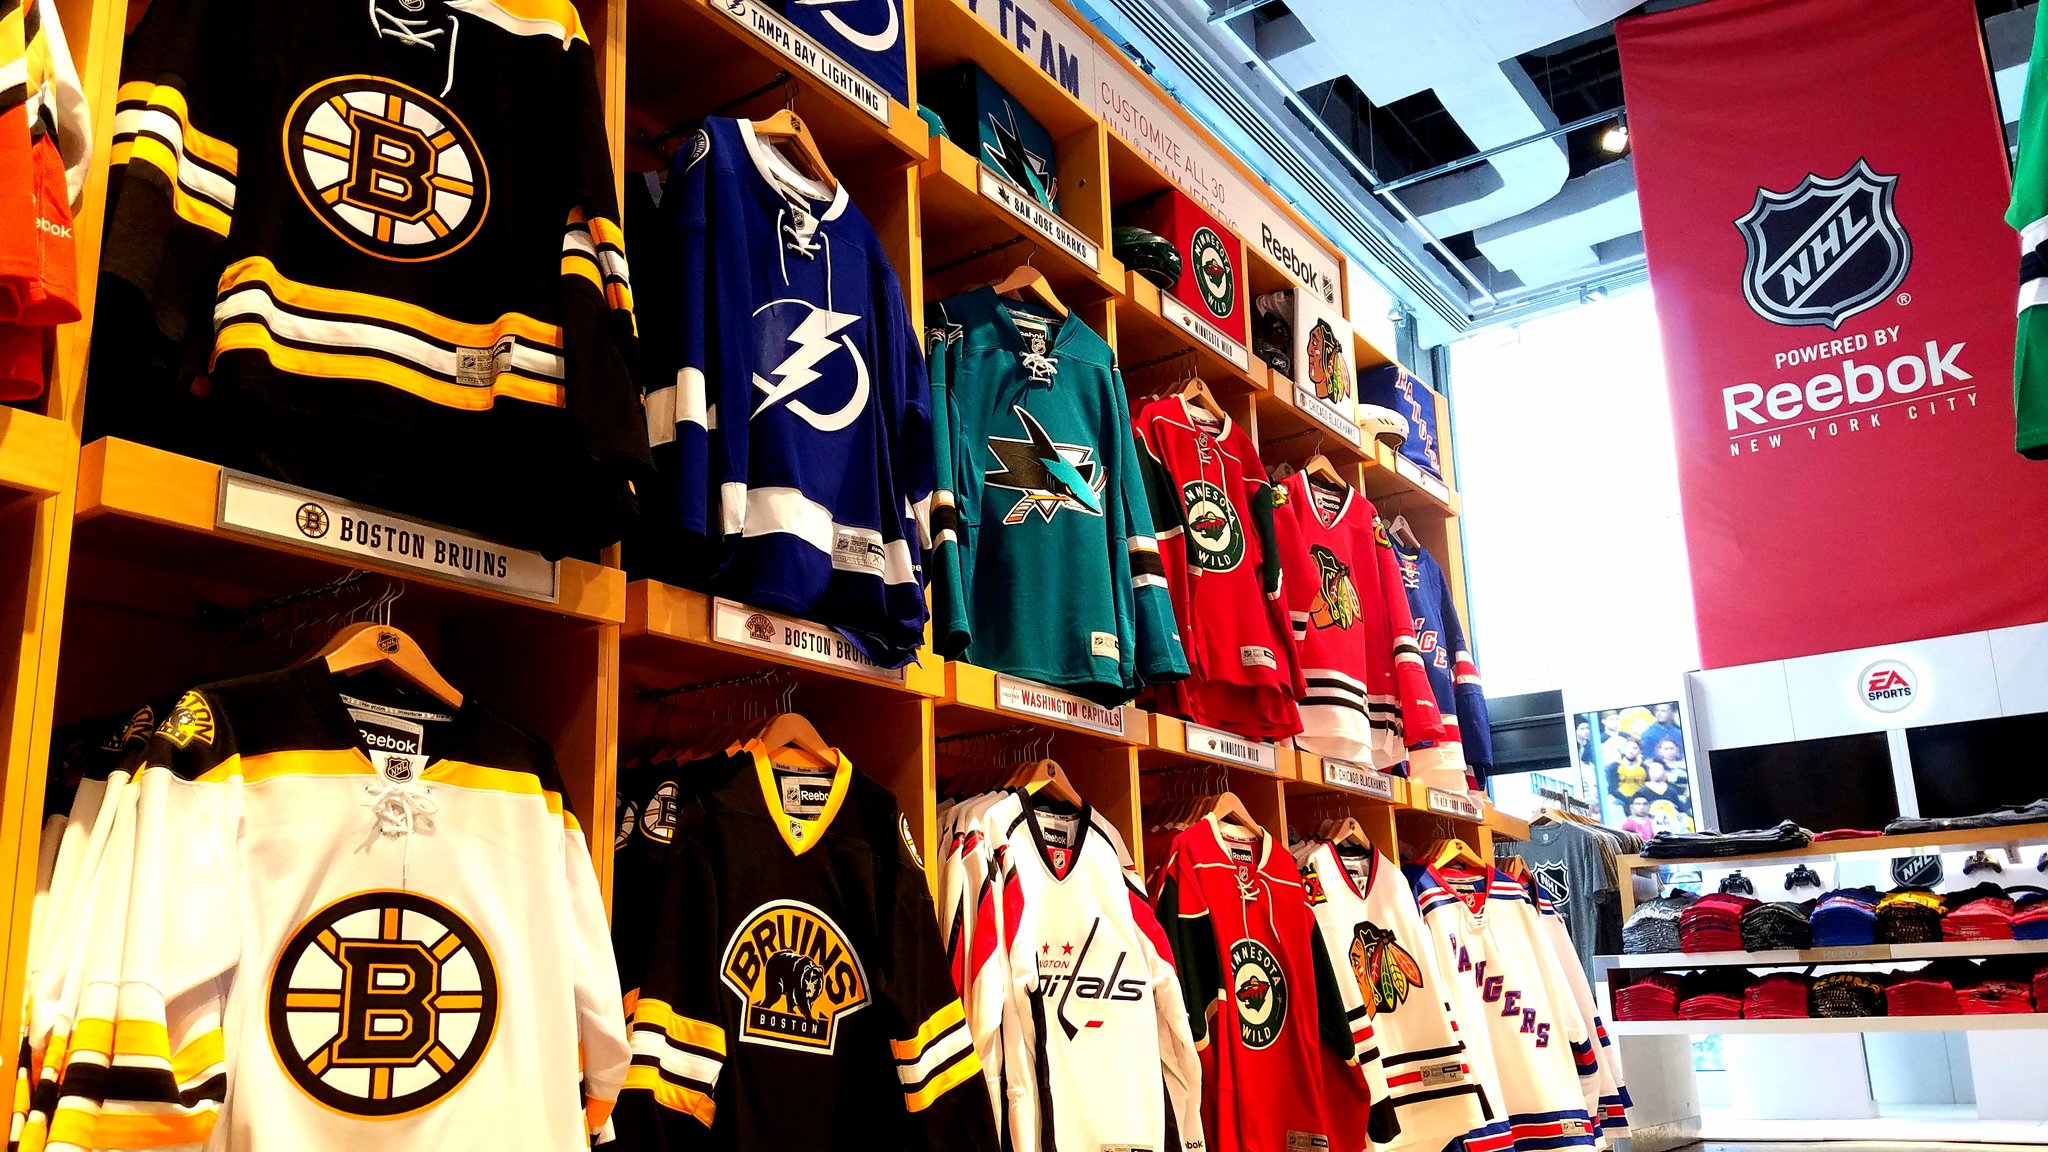 NHL Store NYC on X: NEW SALE PRICES ON JERSEYS! -$40 blank men's